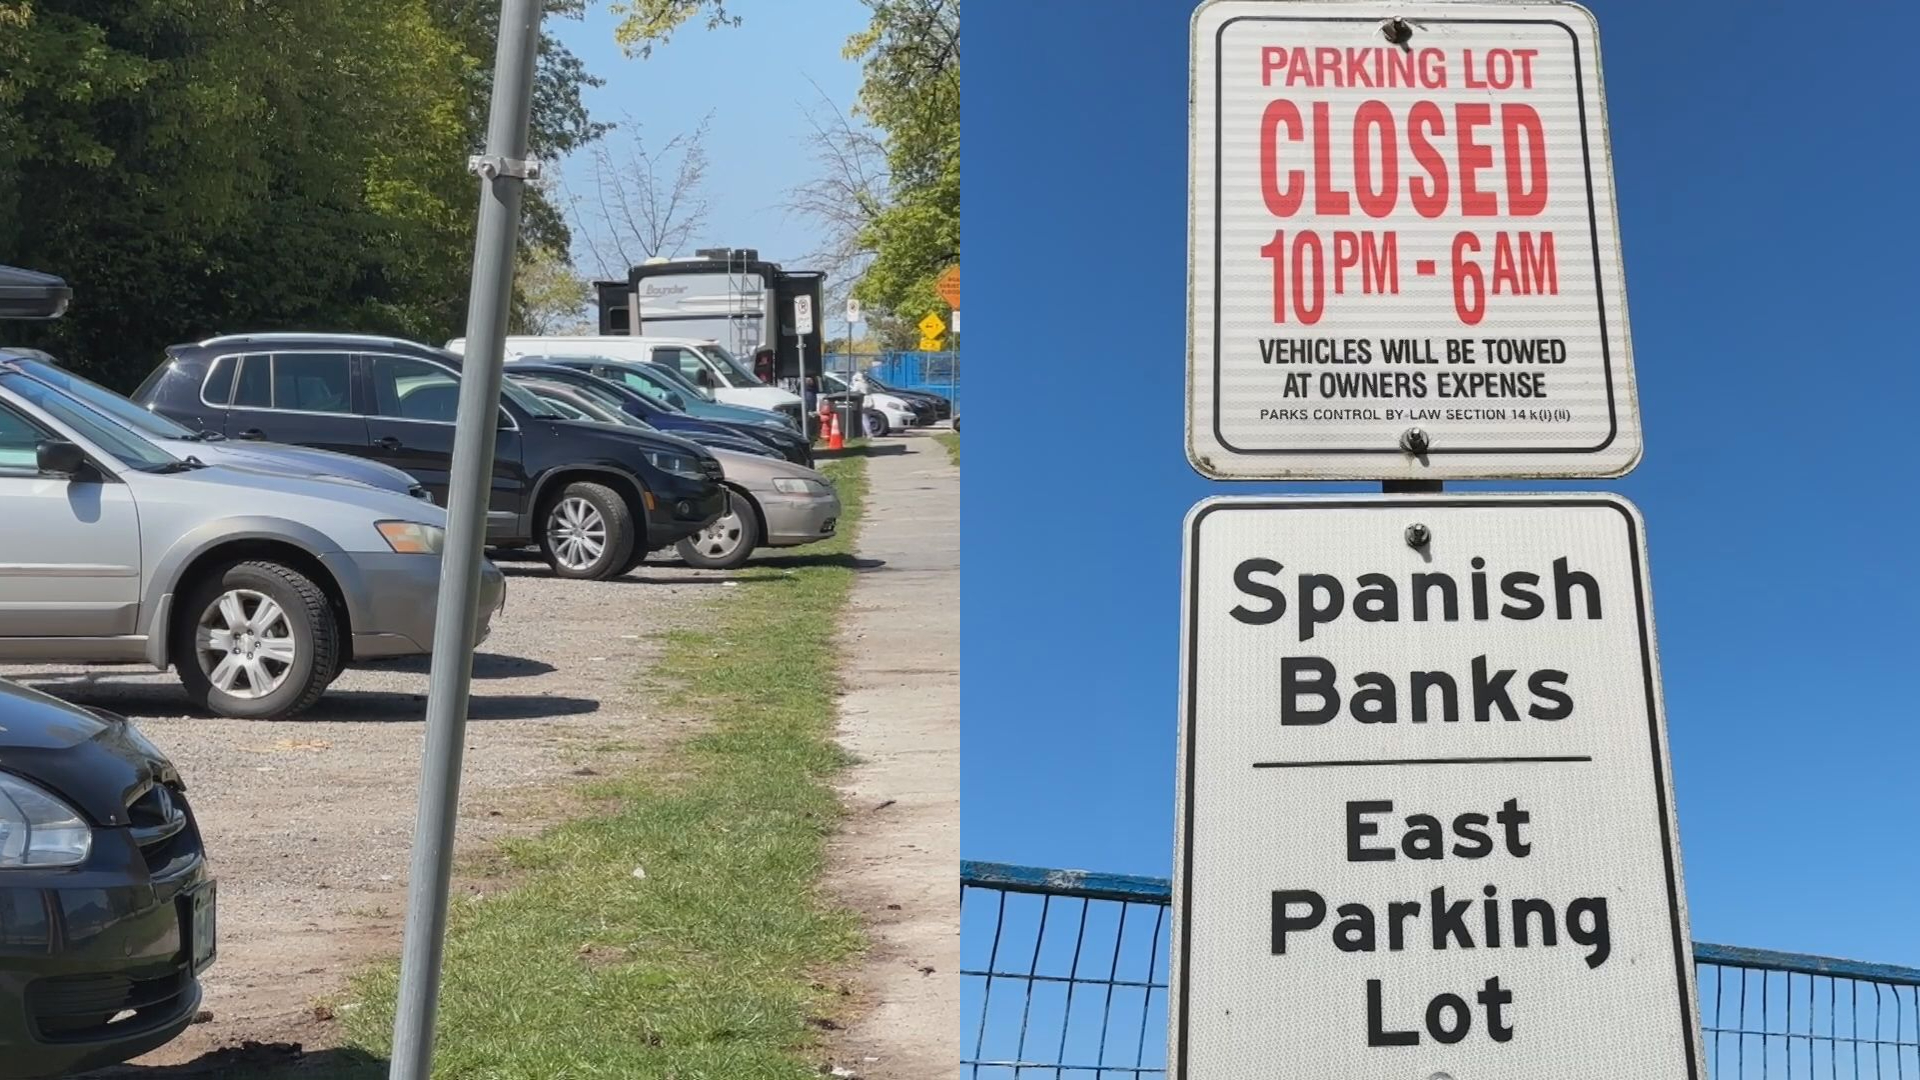 Vancouver Park Board reconsiders pay parking at Spanish Banks beach